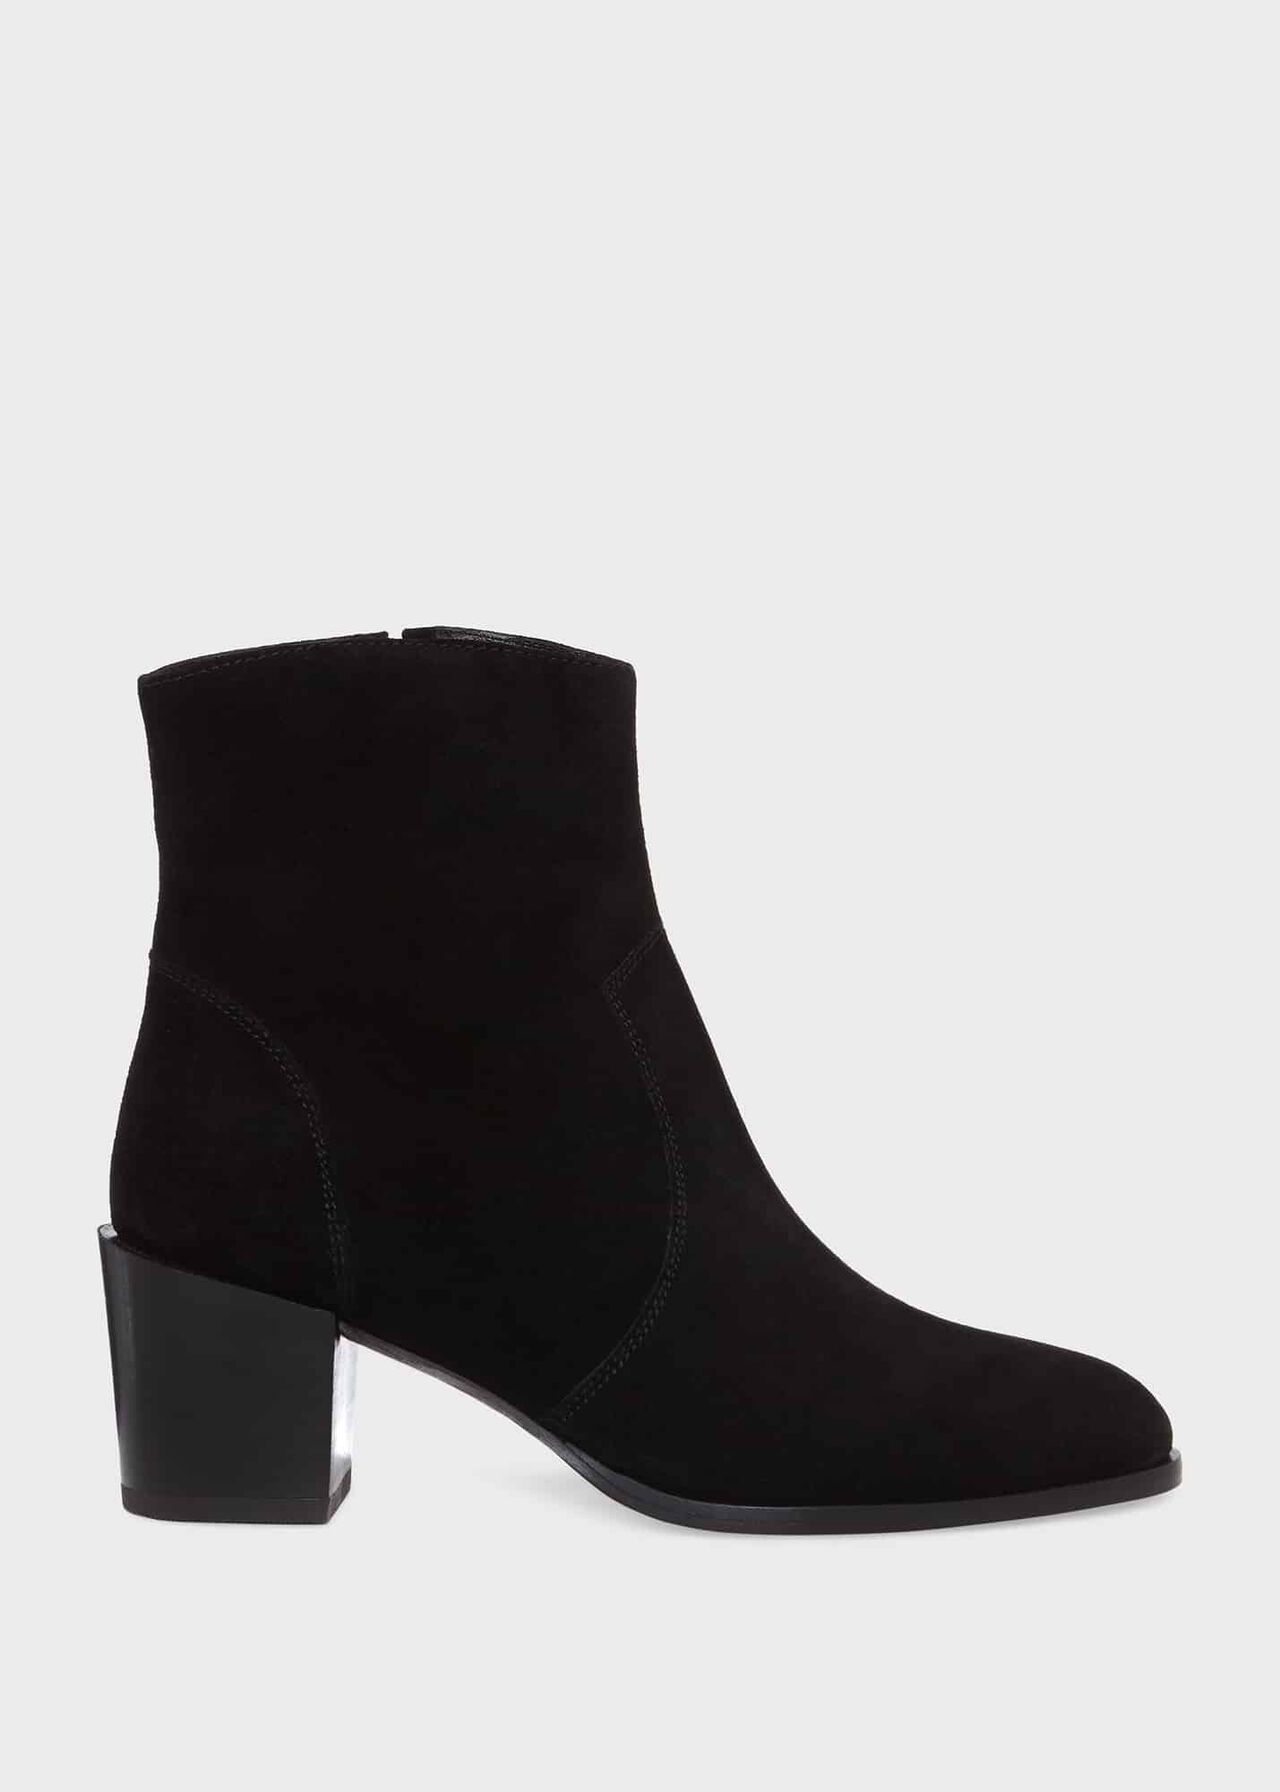 Hester Western Ankle Boots | Hobbs UK